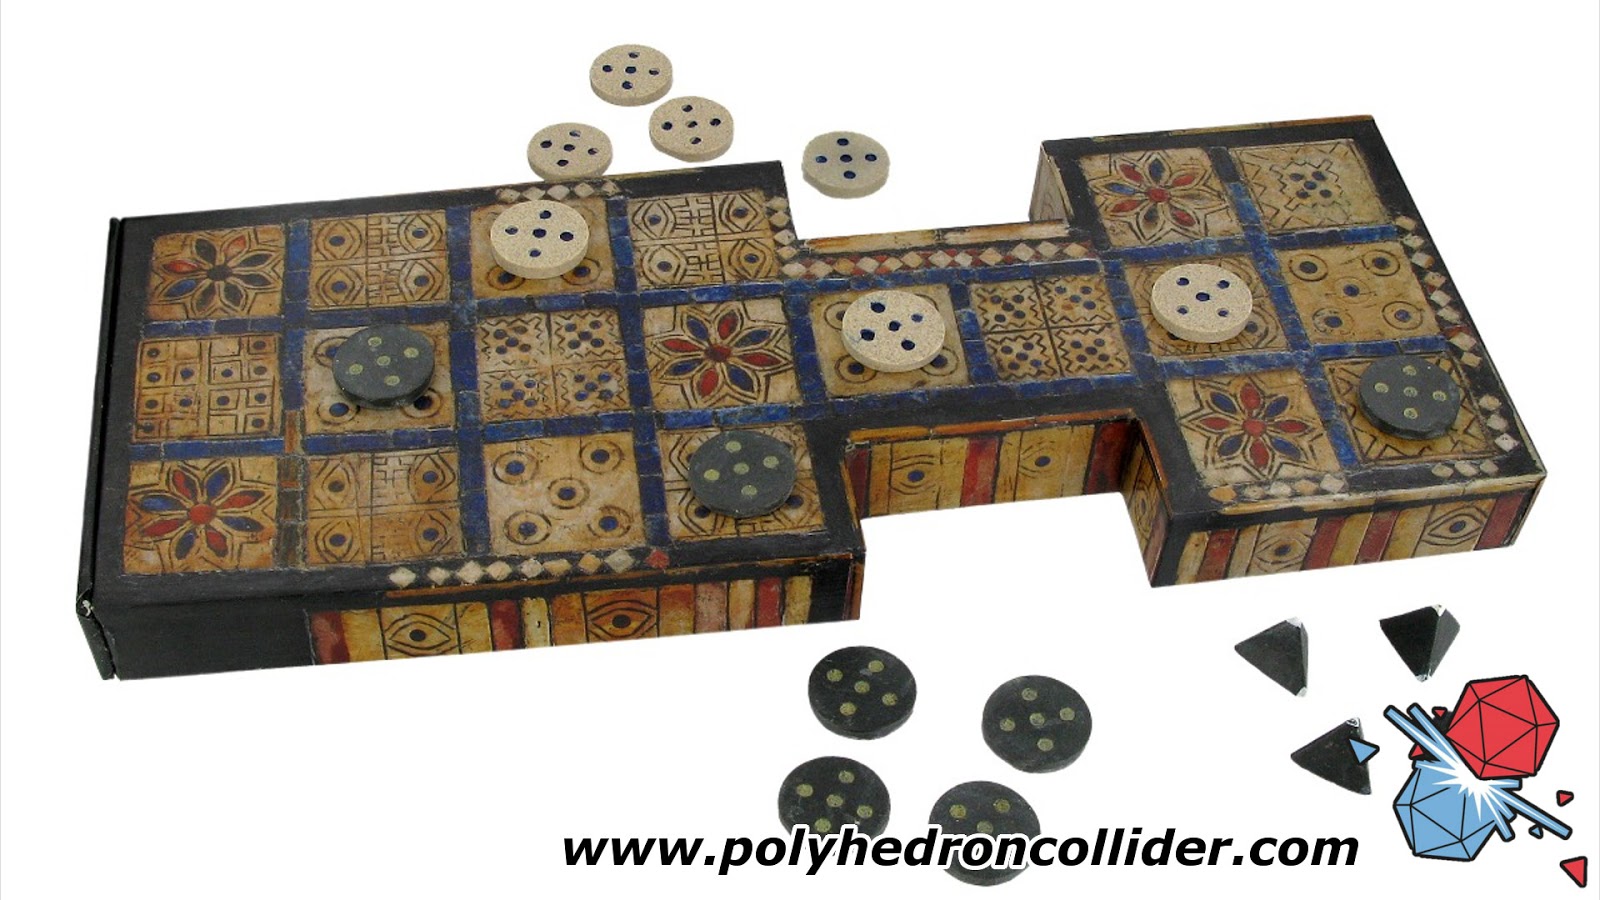 Polyhedron Collider - Board Game News